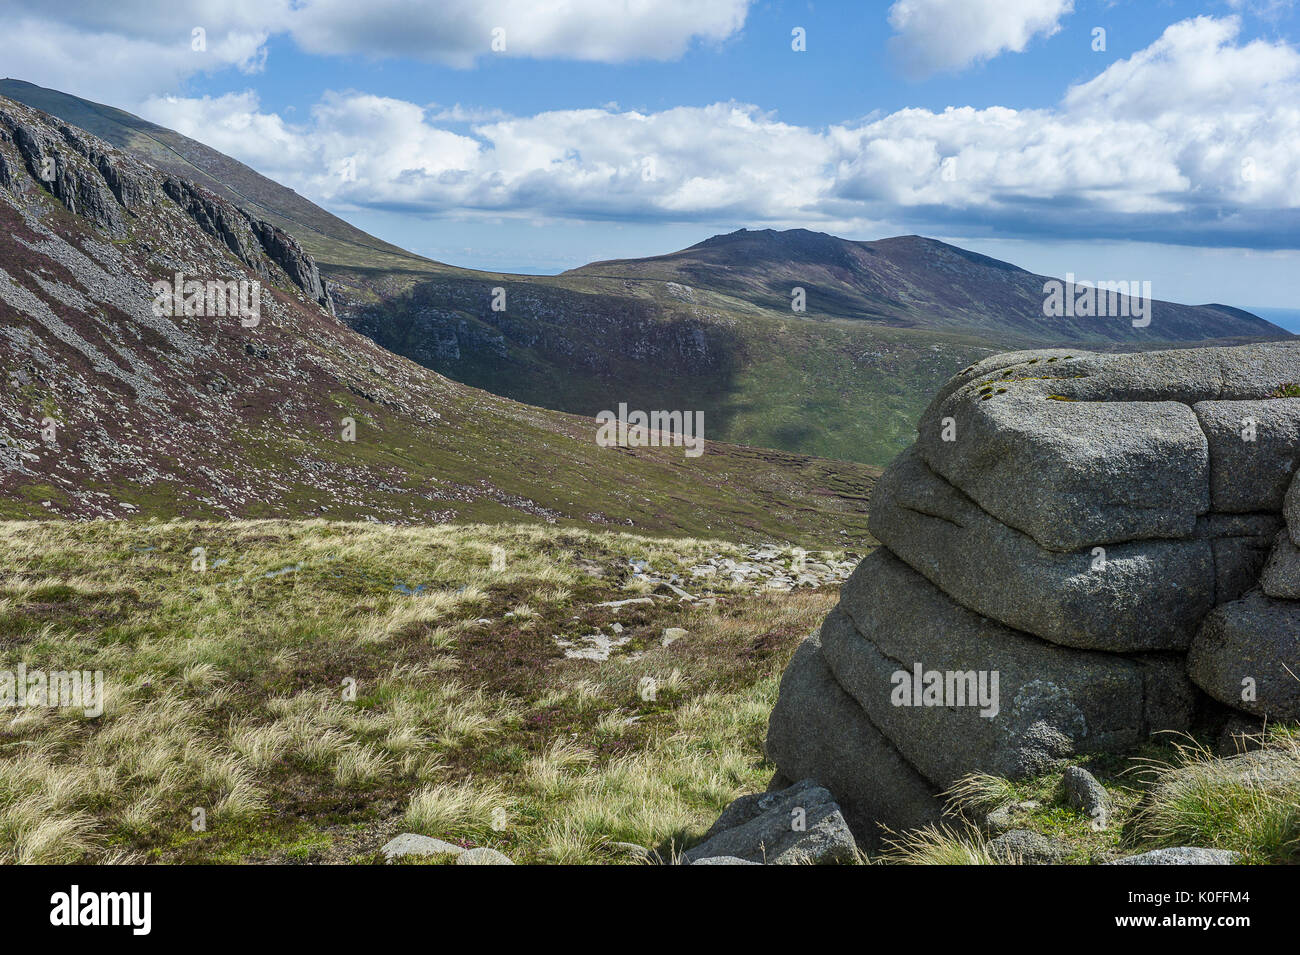 Mountain walking in the great outdoors Stock Photo